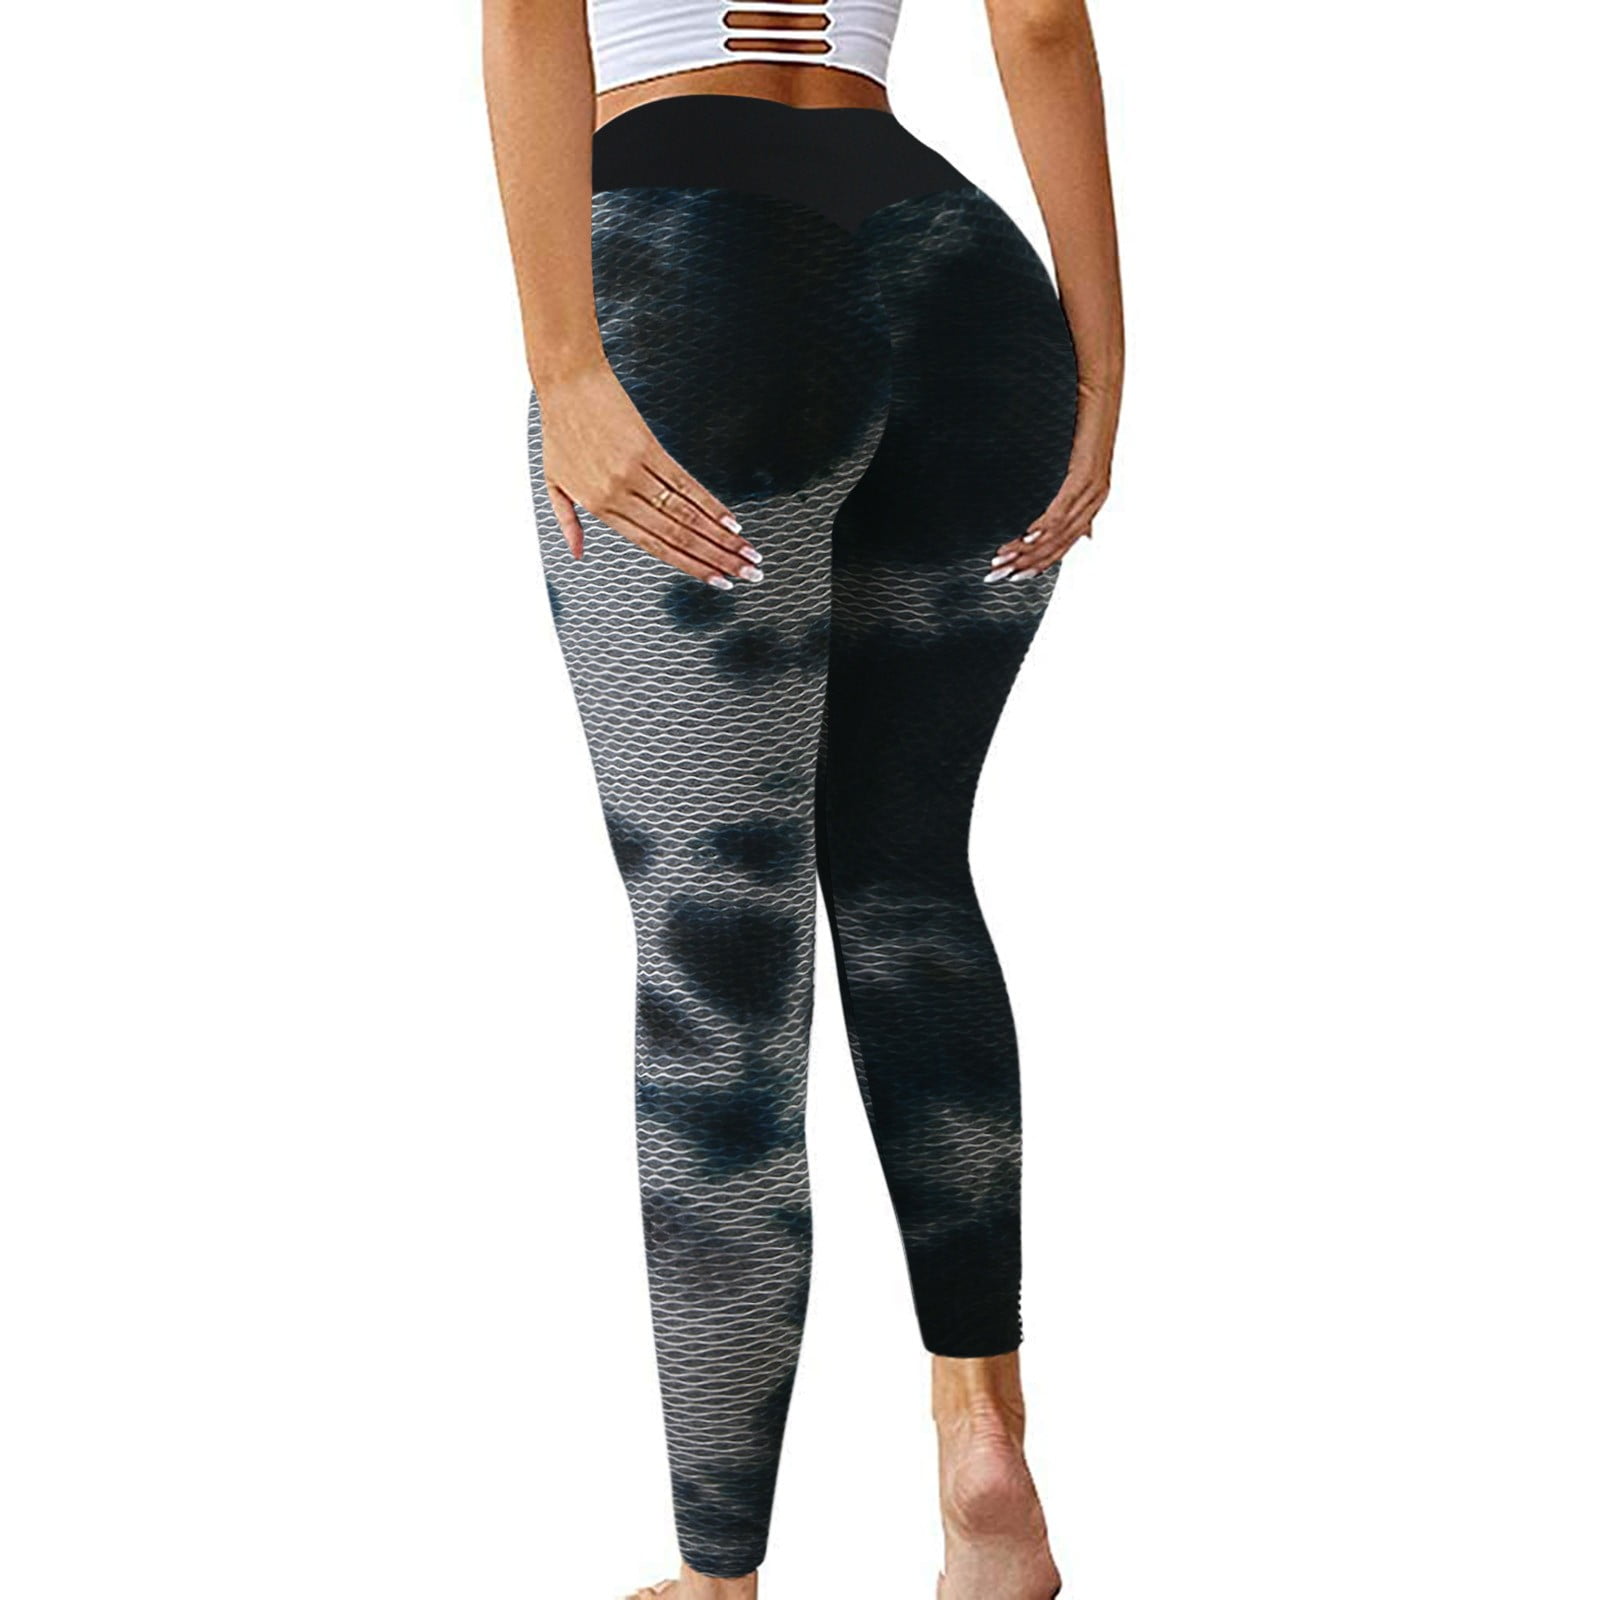 High Waist Yoga Warm Leggings Sports Tights Thermal Woman Running Pants  Sexy Butt Lifting Gym Fitness (Color : Black, Size : Medium) at   Women's Clothing store